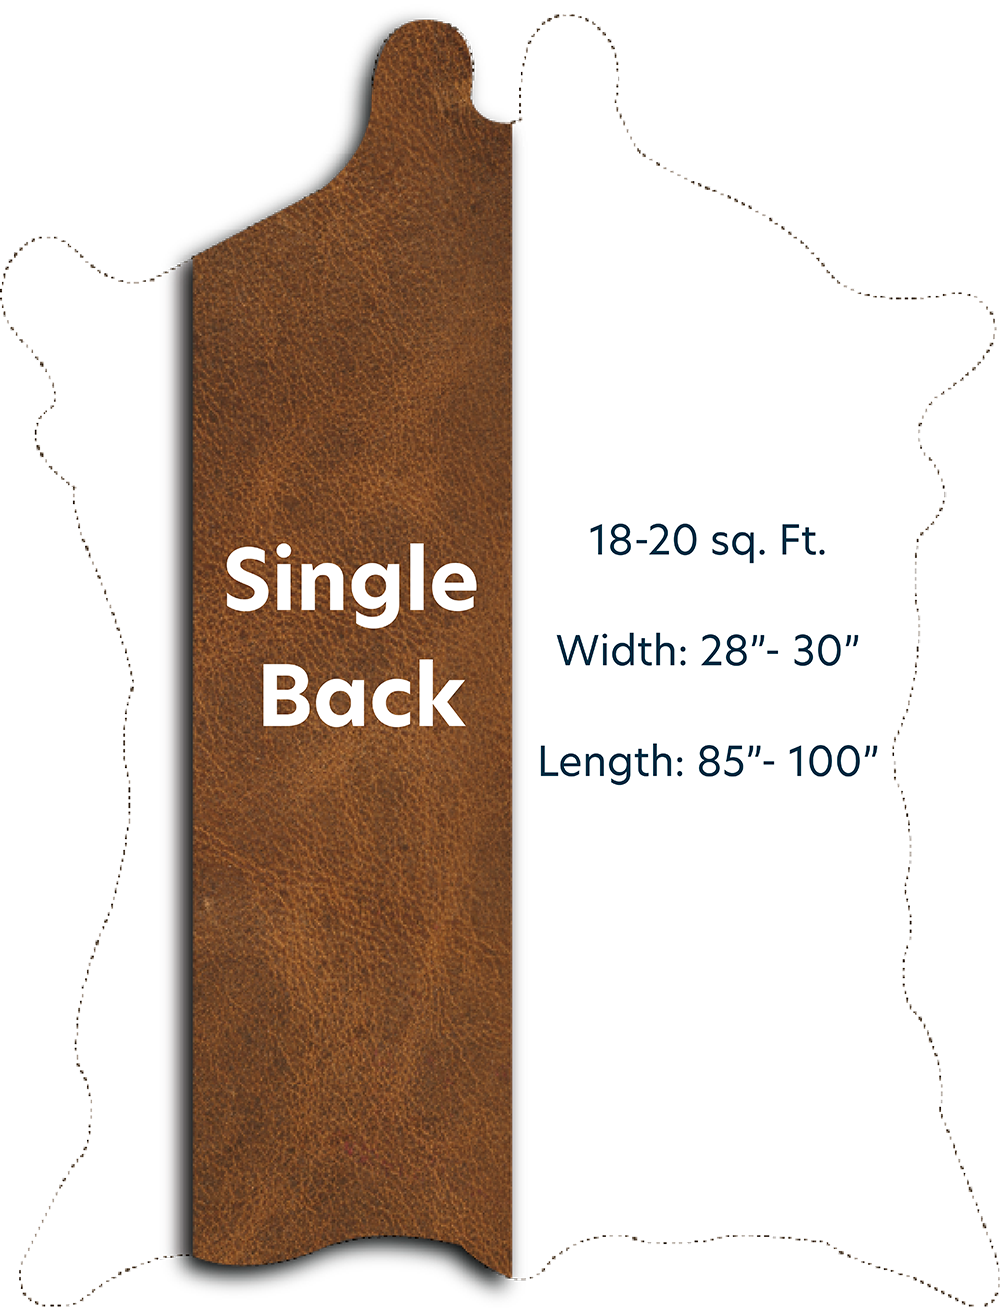 Single Back with Dimensions